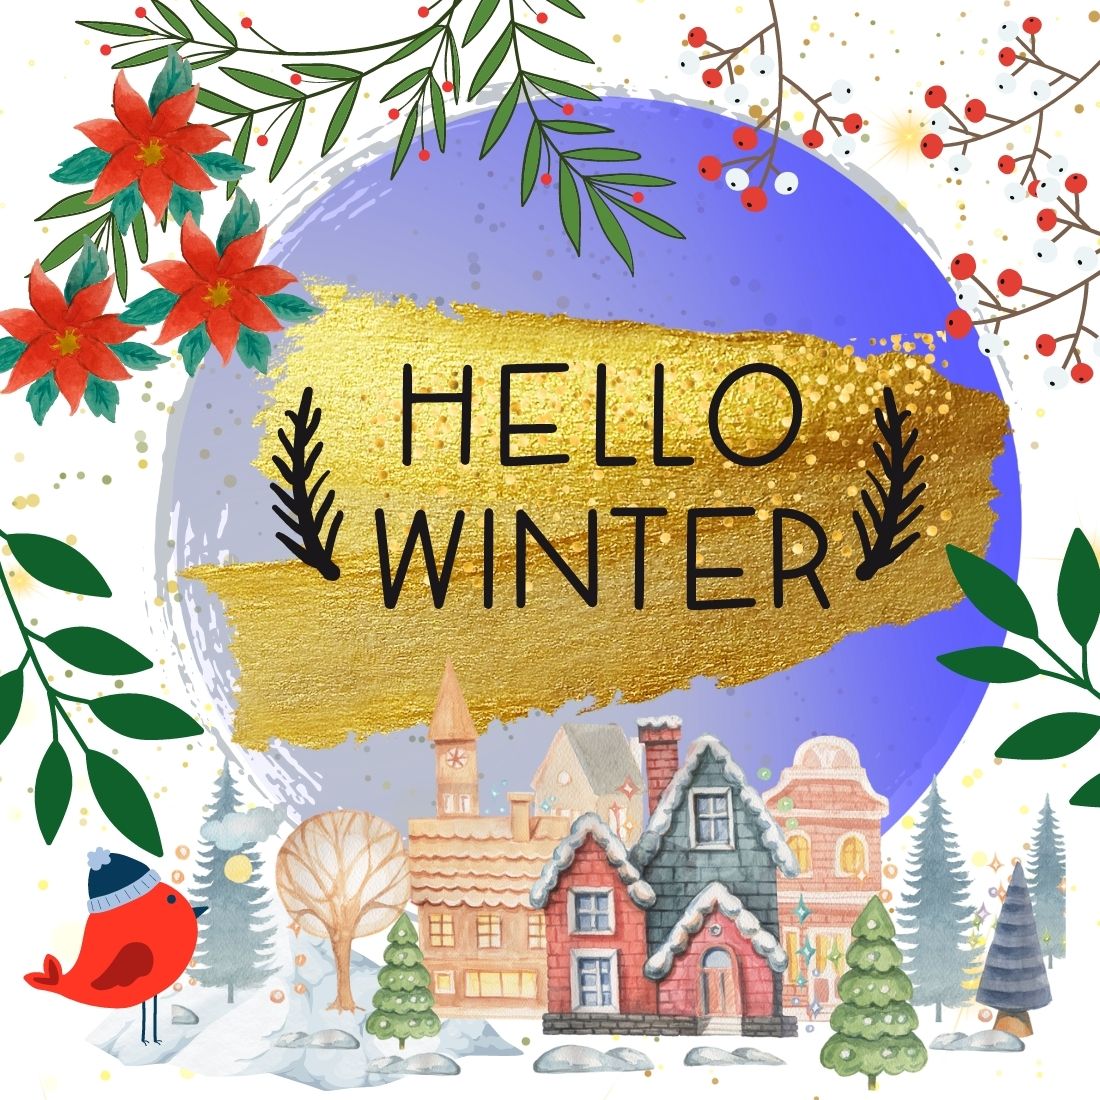 Merry Christmas Card Hello Winter Design cover image.